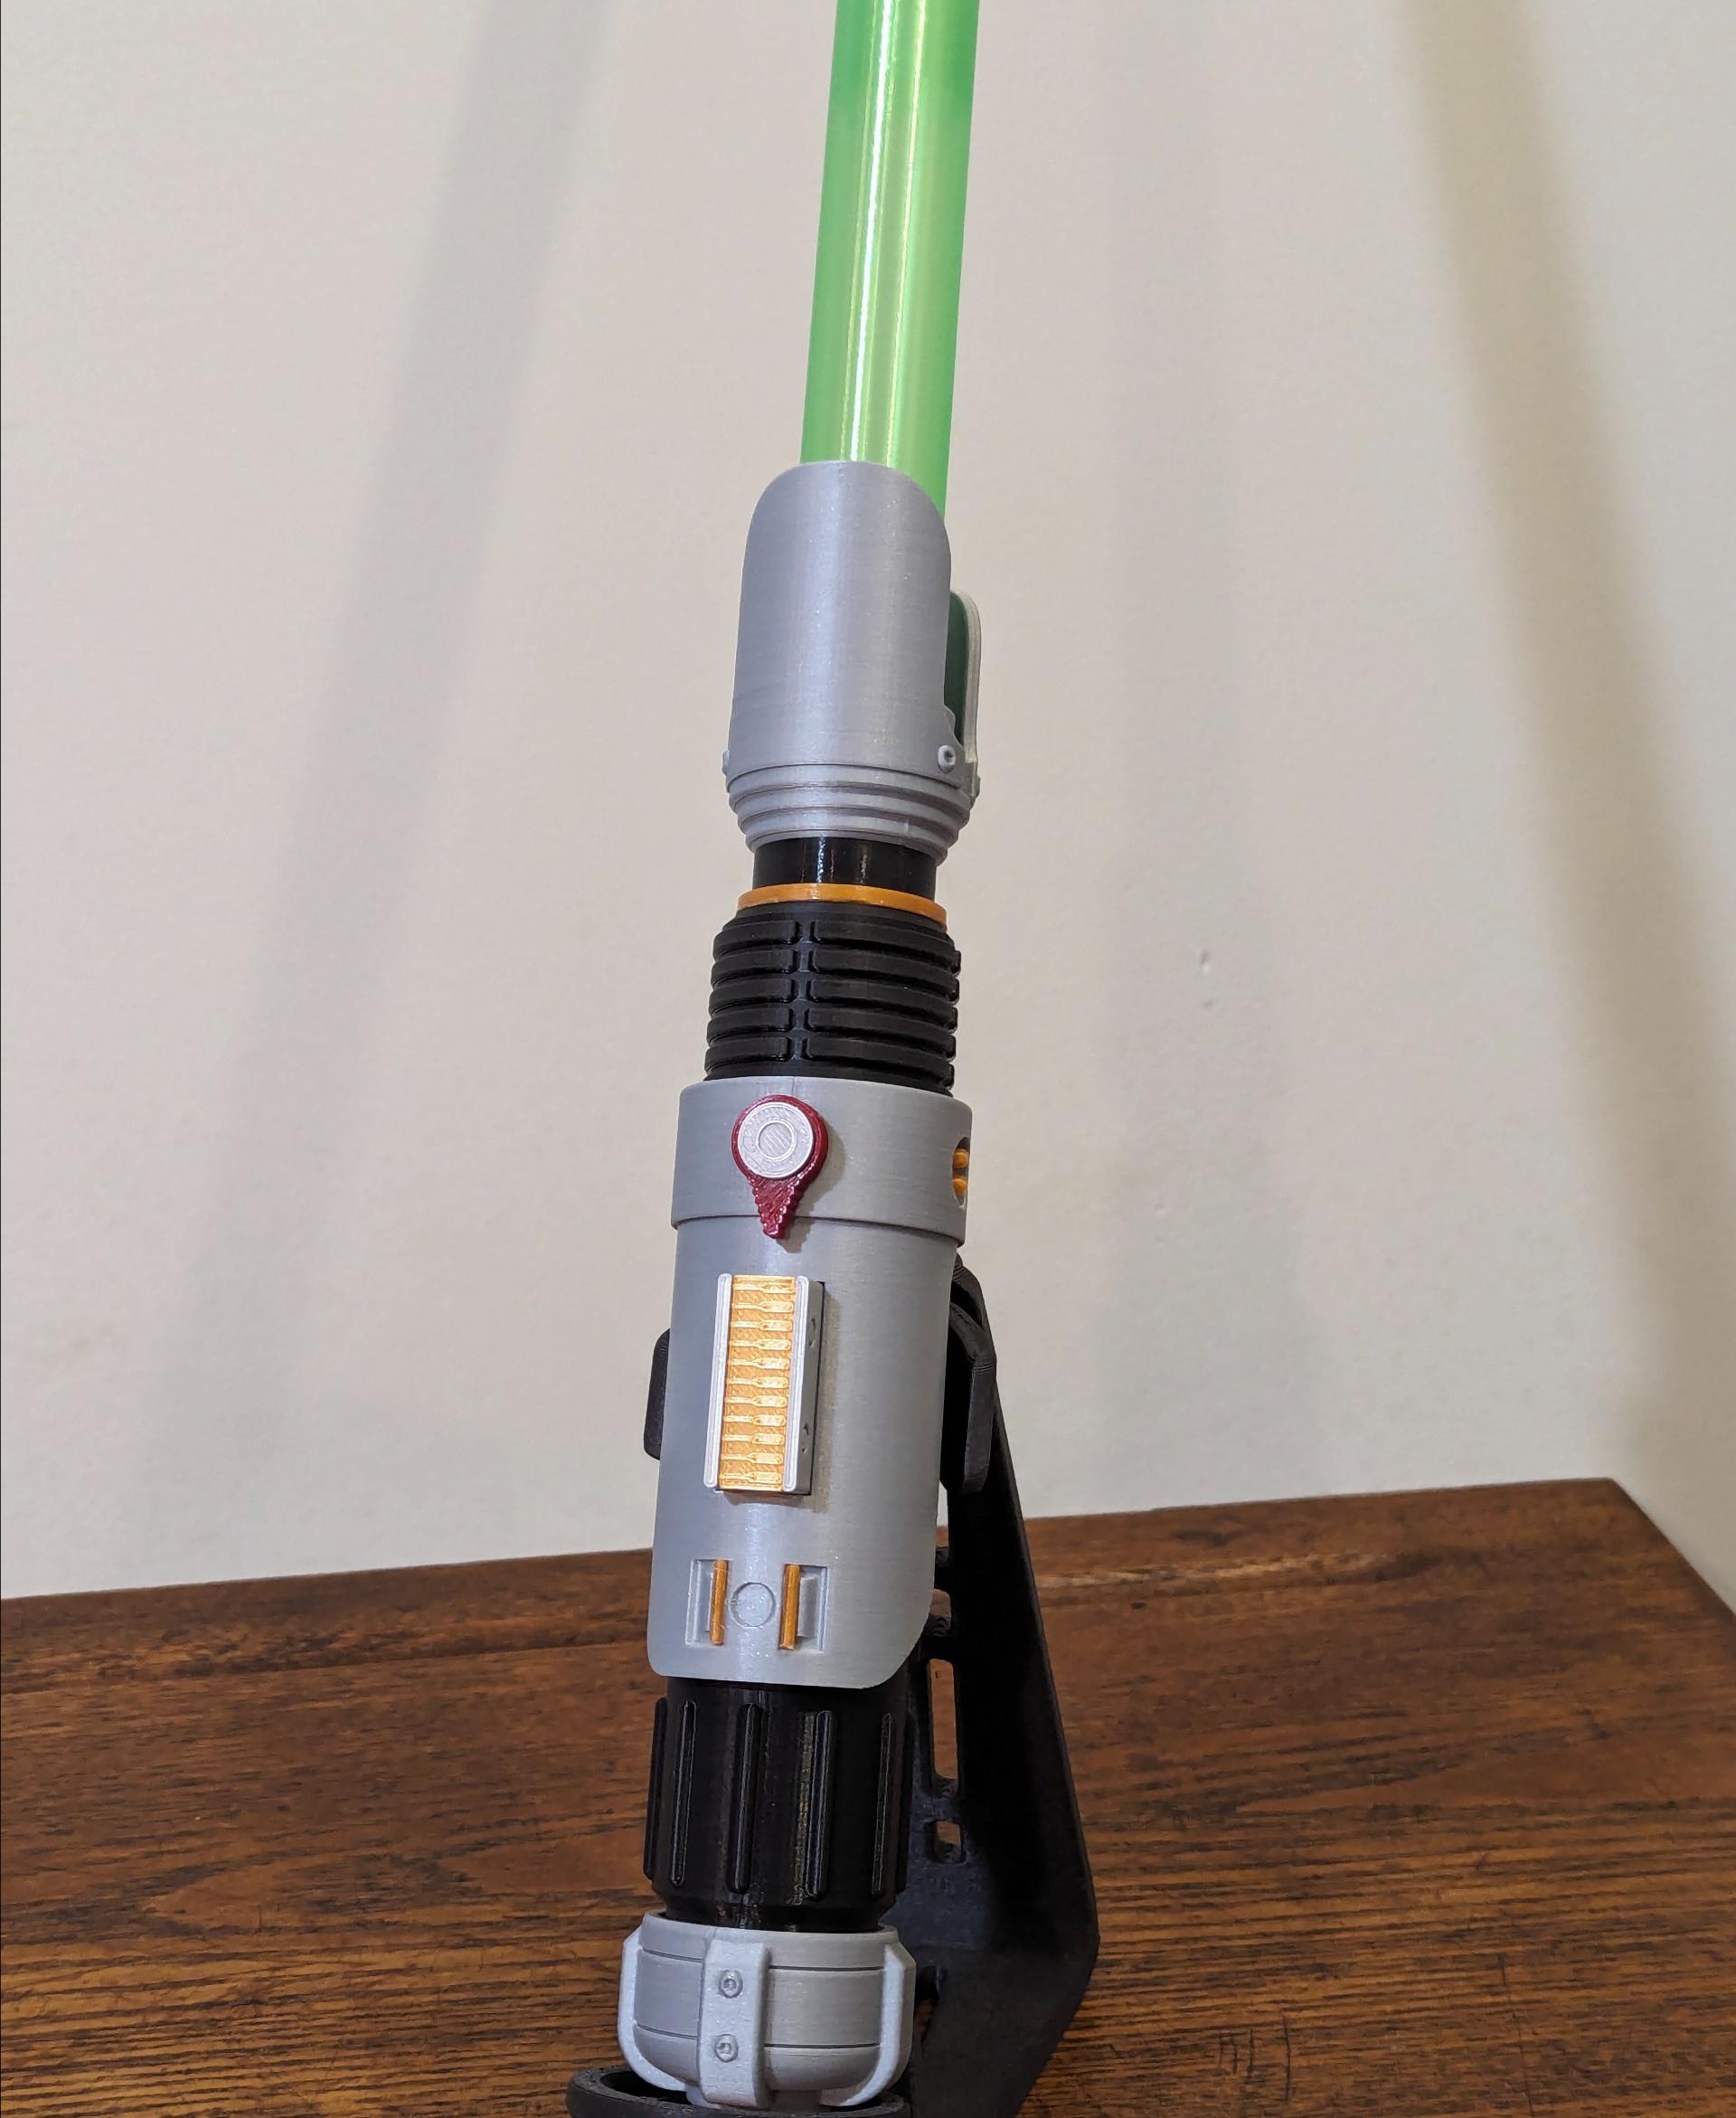 Sabine Wren’s Collapsing Lightsaber - Filaments used:

Polymaker_3D PolyLite Metallic Silver

PrintedSolid Black

AtomicFilament Dark Cherry Red and True Gold

ZIRO3DFILAMENT Transparent Green

Printed on Prusa MK3.5 - 3d model